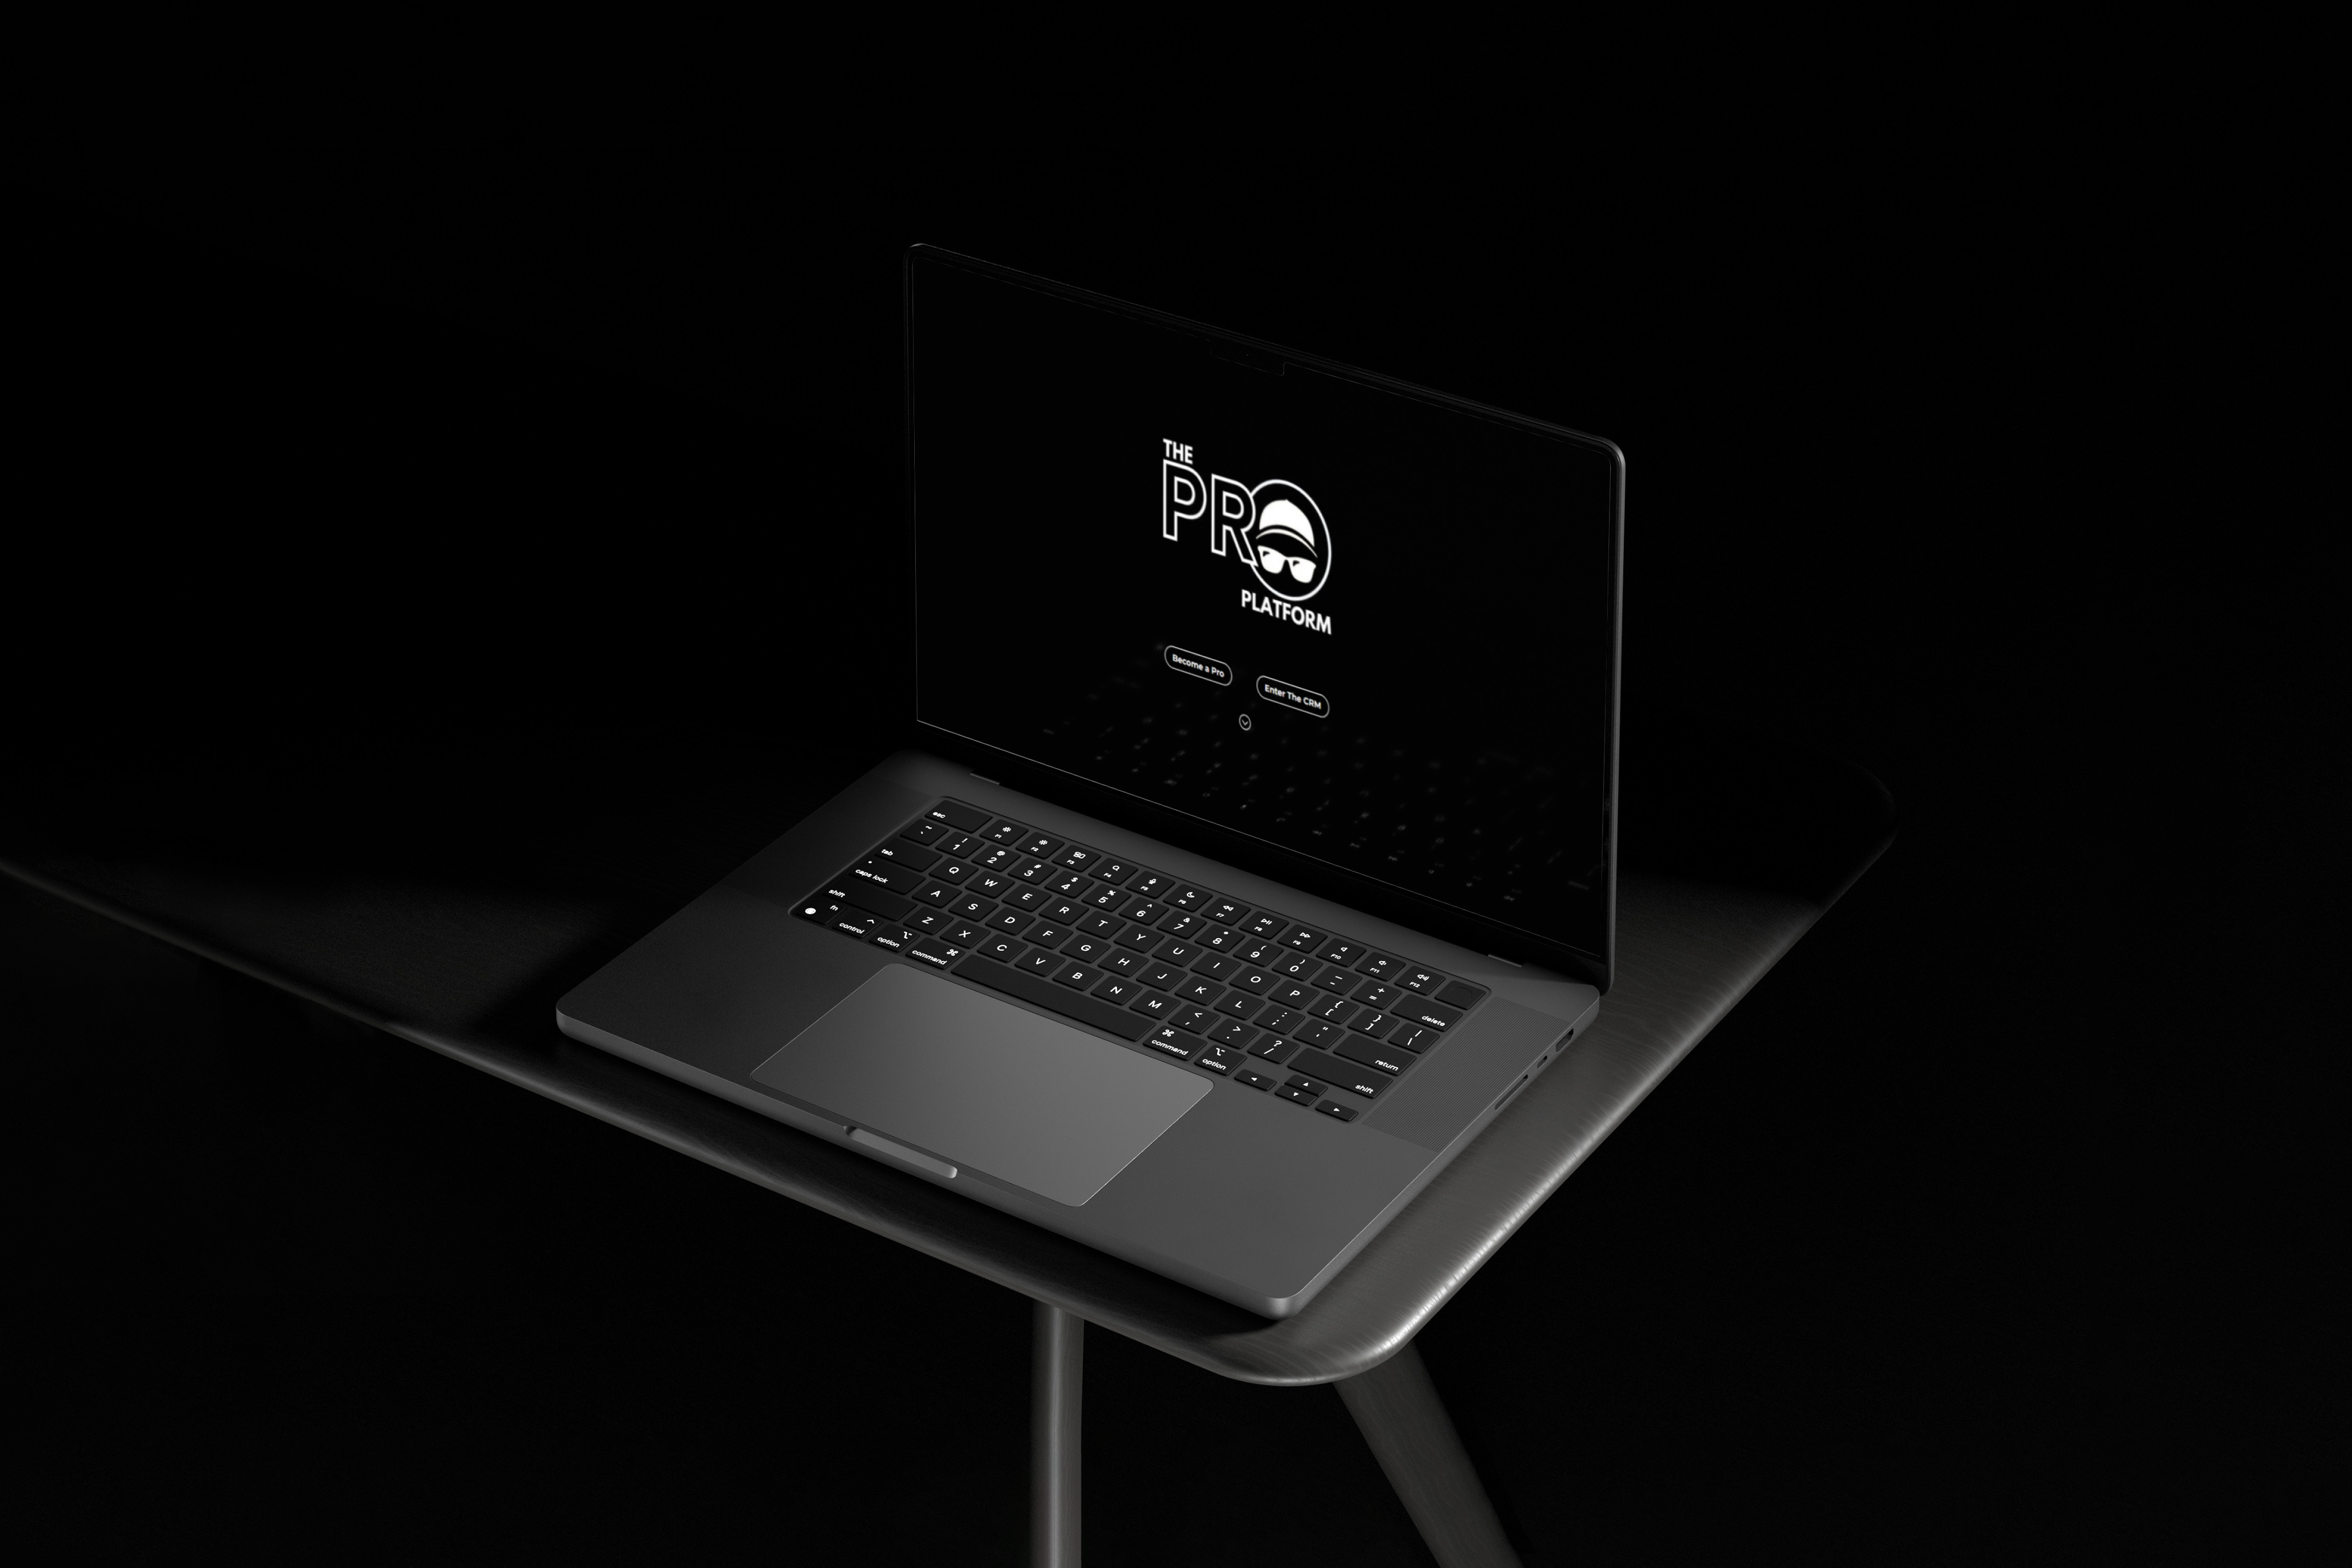 A black laptop on a table in a dark room.